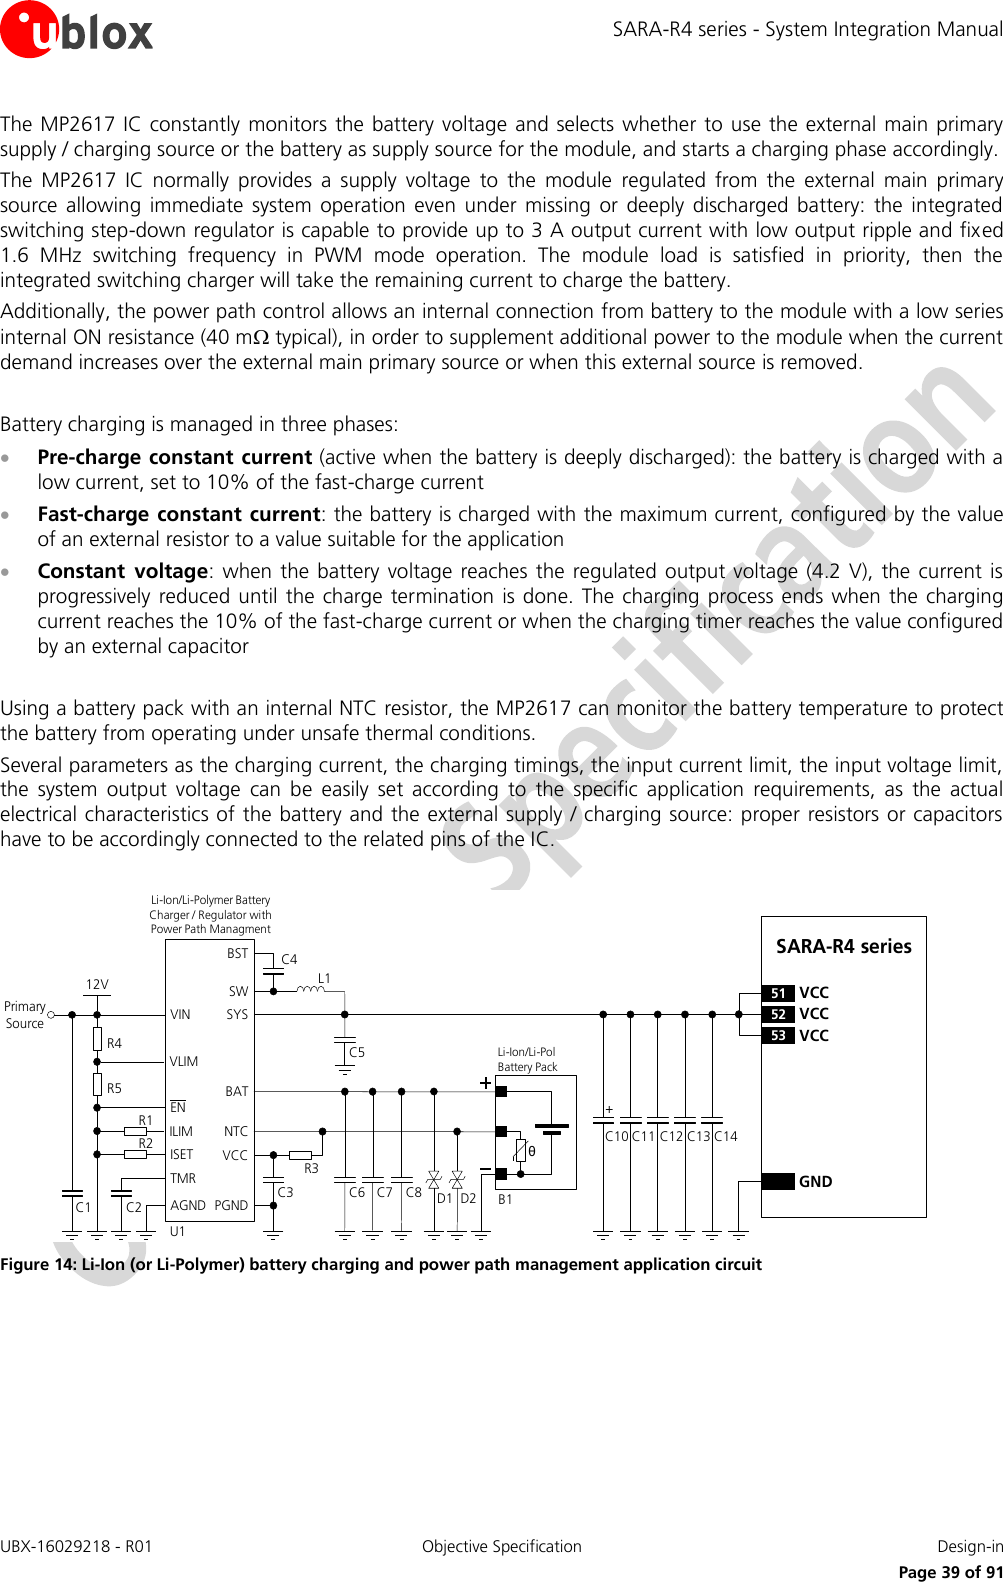 SARA-R4 series - System Integration Manual UBX-16029218 - R01  Objective Specification  Design-in     Page 39 of 91 The MP2617 IC constantly  monitors  the battery voltage and selects whether to use the external main primary supply / charging source or the battery as supply source for the module, and starts a charging phase accordingly.  The  MP2617  IC  normally  provides  a  supply  voltage  to  the  module  regulated  from  the  external  main  primary source  allowing  immediate  system operation  even  under  missing  or deeply  discharged  battery:  the integrated switching step-down regulator is capable to provide up to 3 A output current with low output ripple and fixed 1.6  MHz  switching  frequency  in  PWM  mode  operation.  The  module  load  is  satisfied  in  priority,  then  the integrated switching charger will take the remaining current to charge the battery. Additionally, the power path control allows an internal connection from battery to the module with a low series internal ON resistance (40 m typical), in order to supplement additional power to the module when the current demand increases over the external main primary source or when this external source is removed.  Battery charging is managed in three phases:  Pre-charge constant current (active when the battery is deeply discharged): the battery is charged with a low current, set to 10% of the fast-charge current  Fast-charge constant current: the battery is charged with the maximum current, configured by the value of an external resistor to a value suitable for the application  Constant  voltage:  when  the battery voltage  reaches the regulated  output voltage (4.2 V),  the  current is progressively  reduced  until the charge  termination  is done. The  charging process ends  when  the charging current reaches the 10% of the fast-charge current or when the charging timer reaches the value configured by an external capacitor  Using a battery pack with an internal NTC resistor, the MP2617 can monitor the battery temperature to protect the battery from operating under unsafe thermal conditions. Several parameters as the charging current, the charging timings, the input current limit, the input voltage limit, the  system  output  voltage  can  be  easily  set  according  to  the  specific  application  requirements,  as  the  actual electrical characteristics of the battery and the external supply / charging source: proper resistors or capacitors have to be accordingly connected to the related pins of the IC.  C10 C13GNDC12C11 C14SARA-R4 series52 VCC53 VCC51 VCC+Primary SourceR3U1ENILIMISETTMRAGNDVINC2C112VNTCPGNDSWSYSBATC4R1R2D1θLi-Ion/Li-Pol Battery PackB1C5Li-Ion/Li-Polymer Battery   Charger / Regulator with Power Path ManagmentVCCC3 C6L1BSTD2VLIMR4R5C7 C8 Figure 14: Li-Ion (or Li-Polymer) battery charging and power path management application circuit 